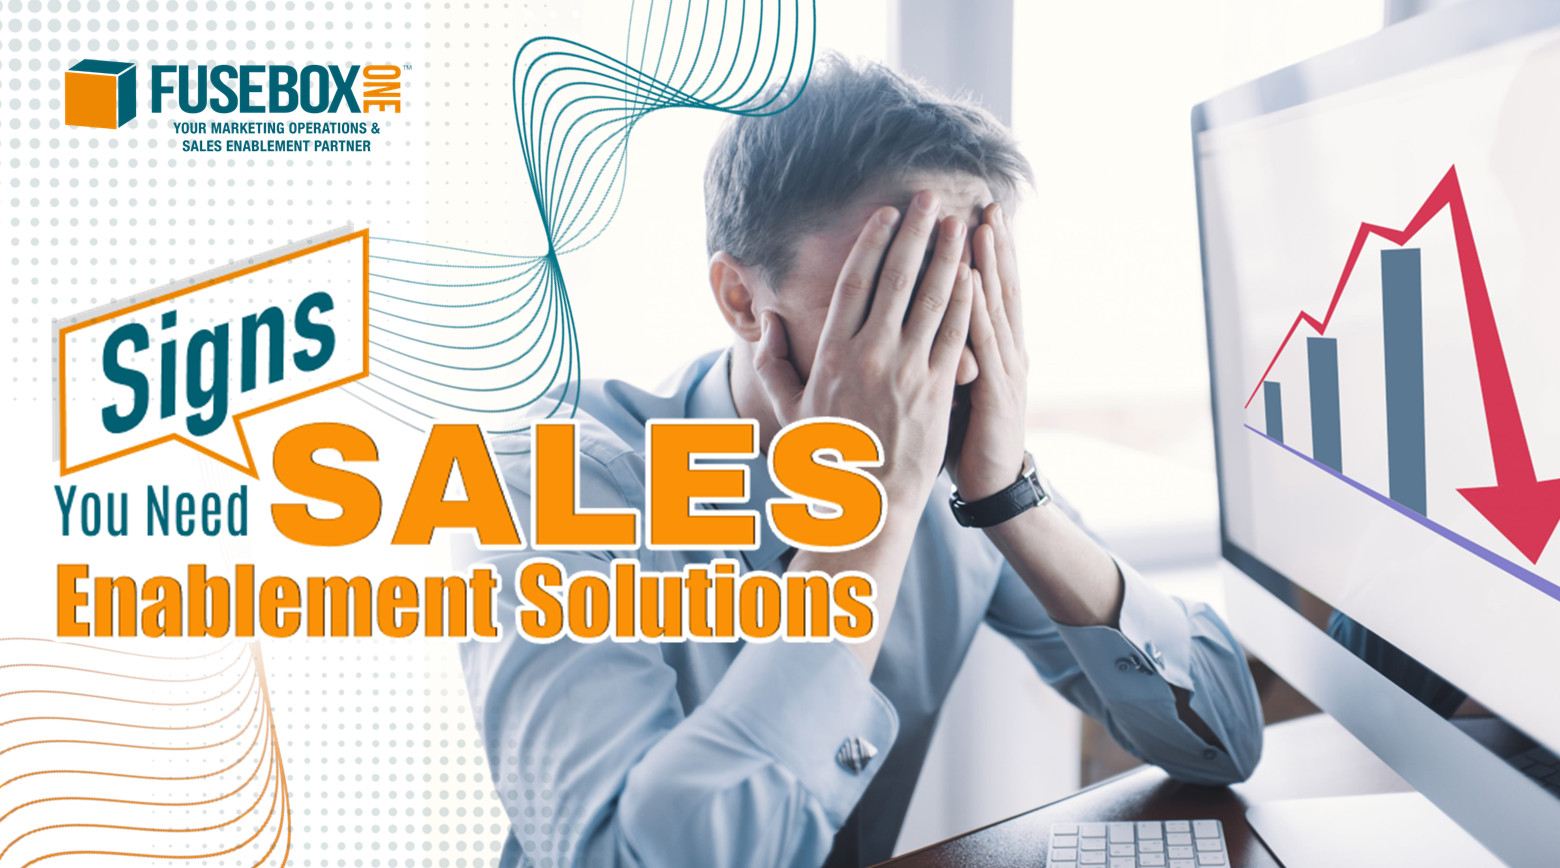 Sales Rep struggling with sales enablement solution